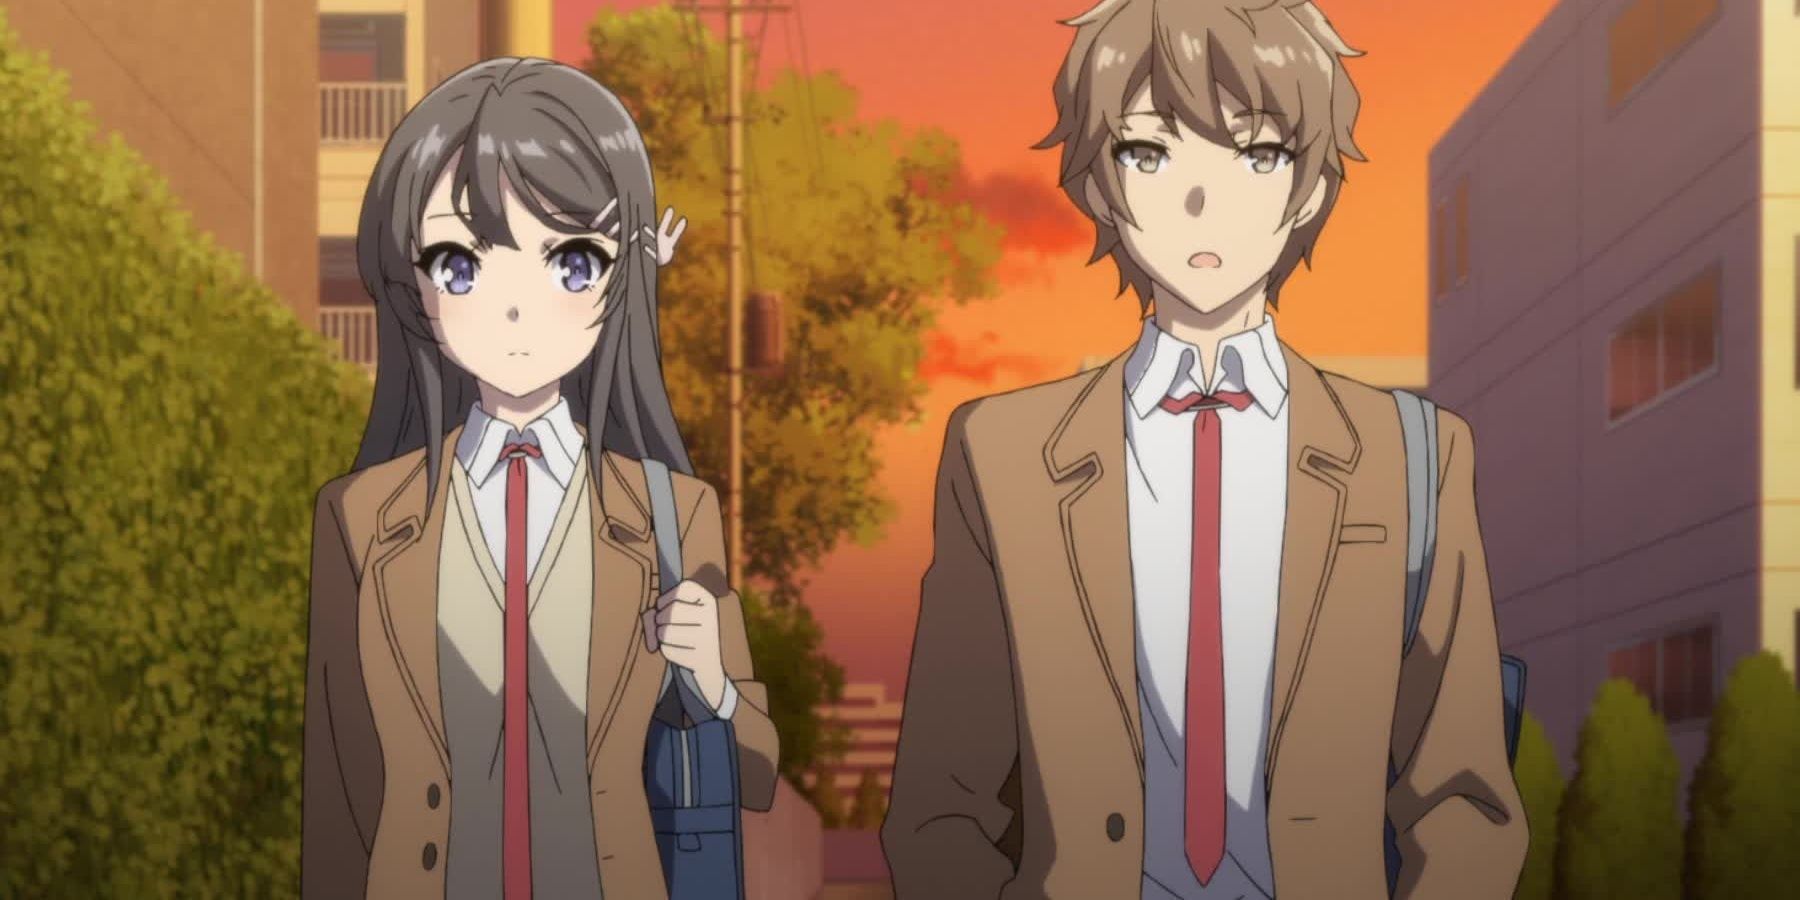 Sakuta and Mai stand side by side in their school uniforms in the evening